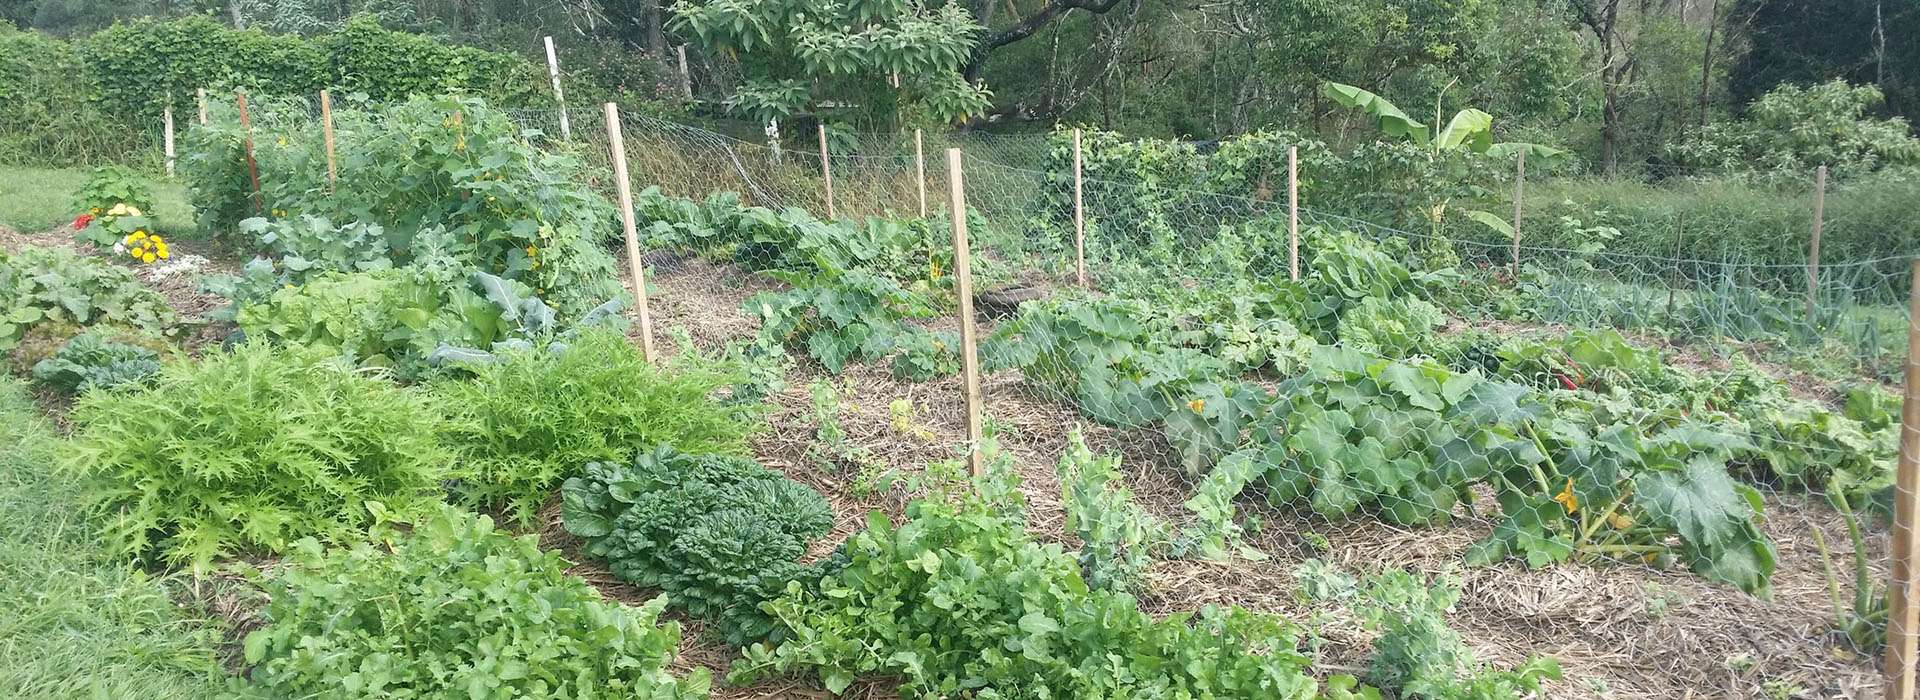 Self sufficiency from your vegetable and herb garden